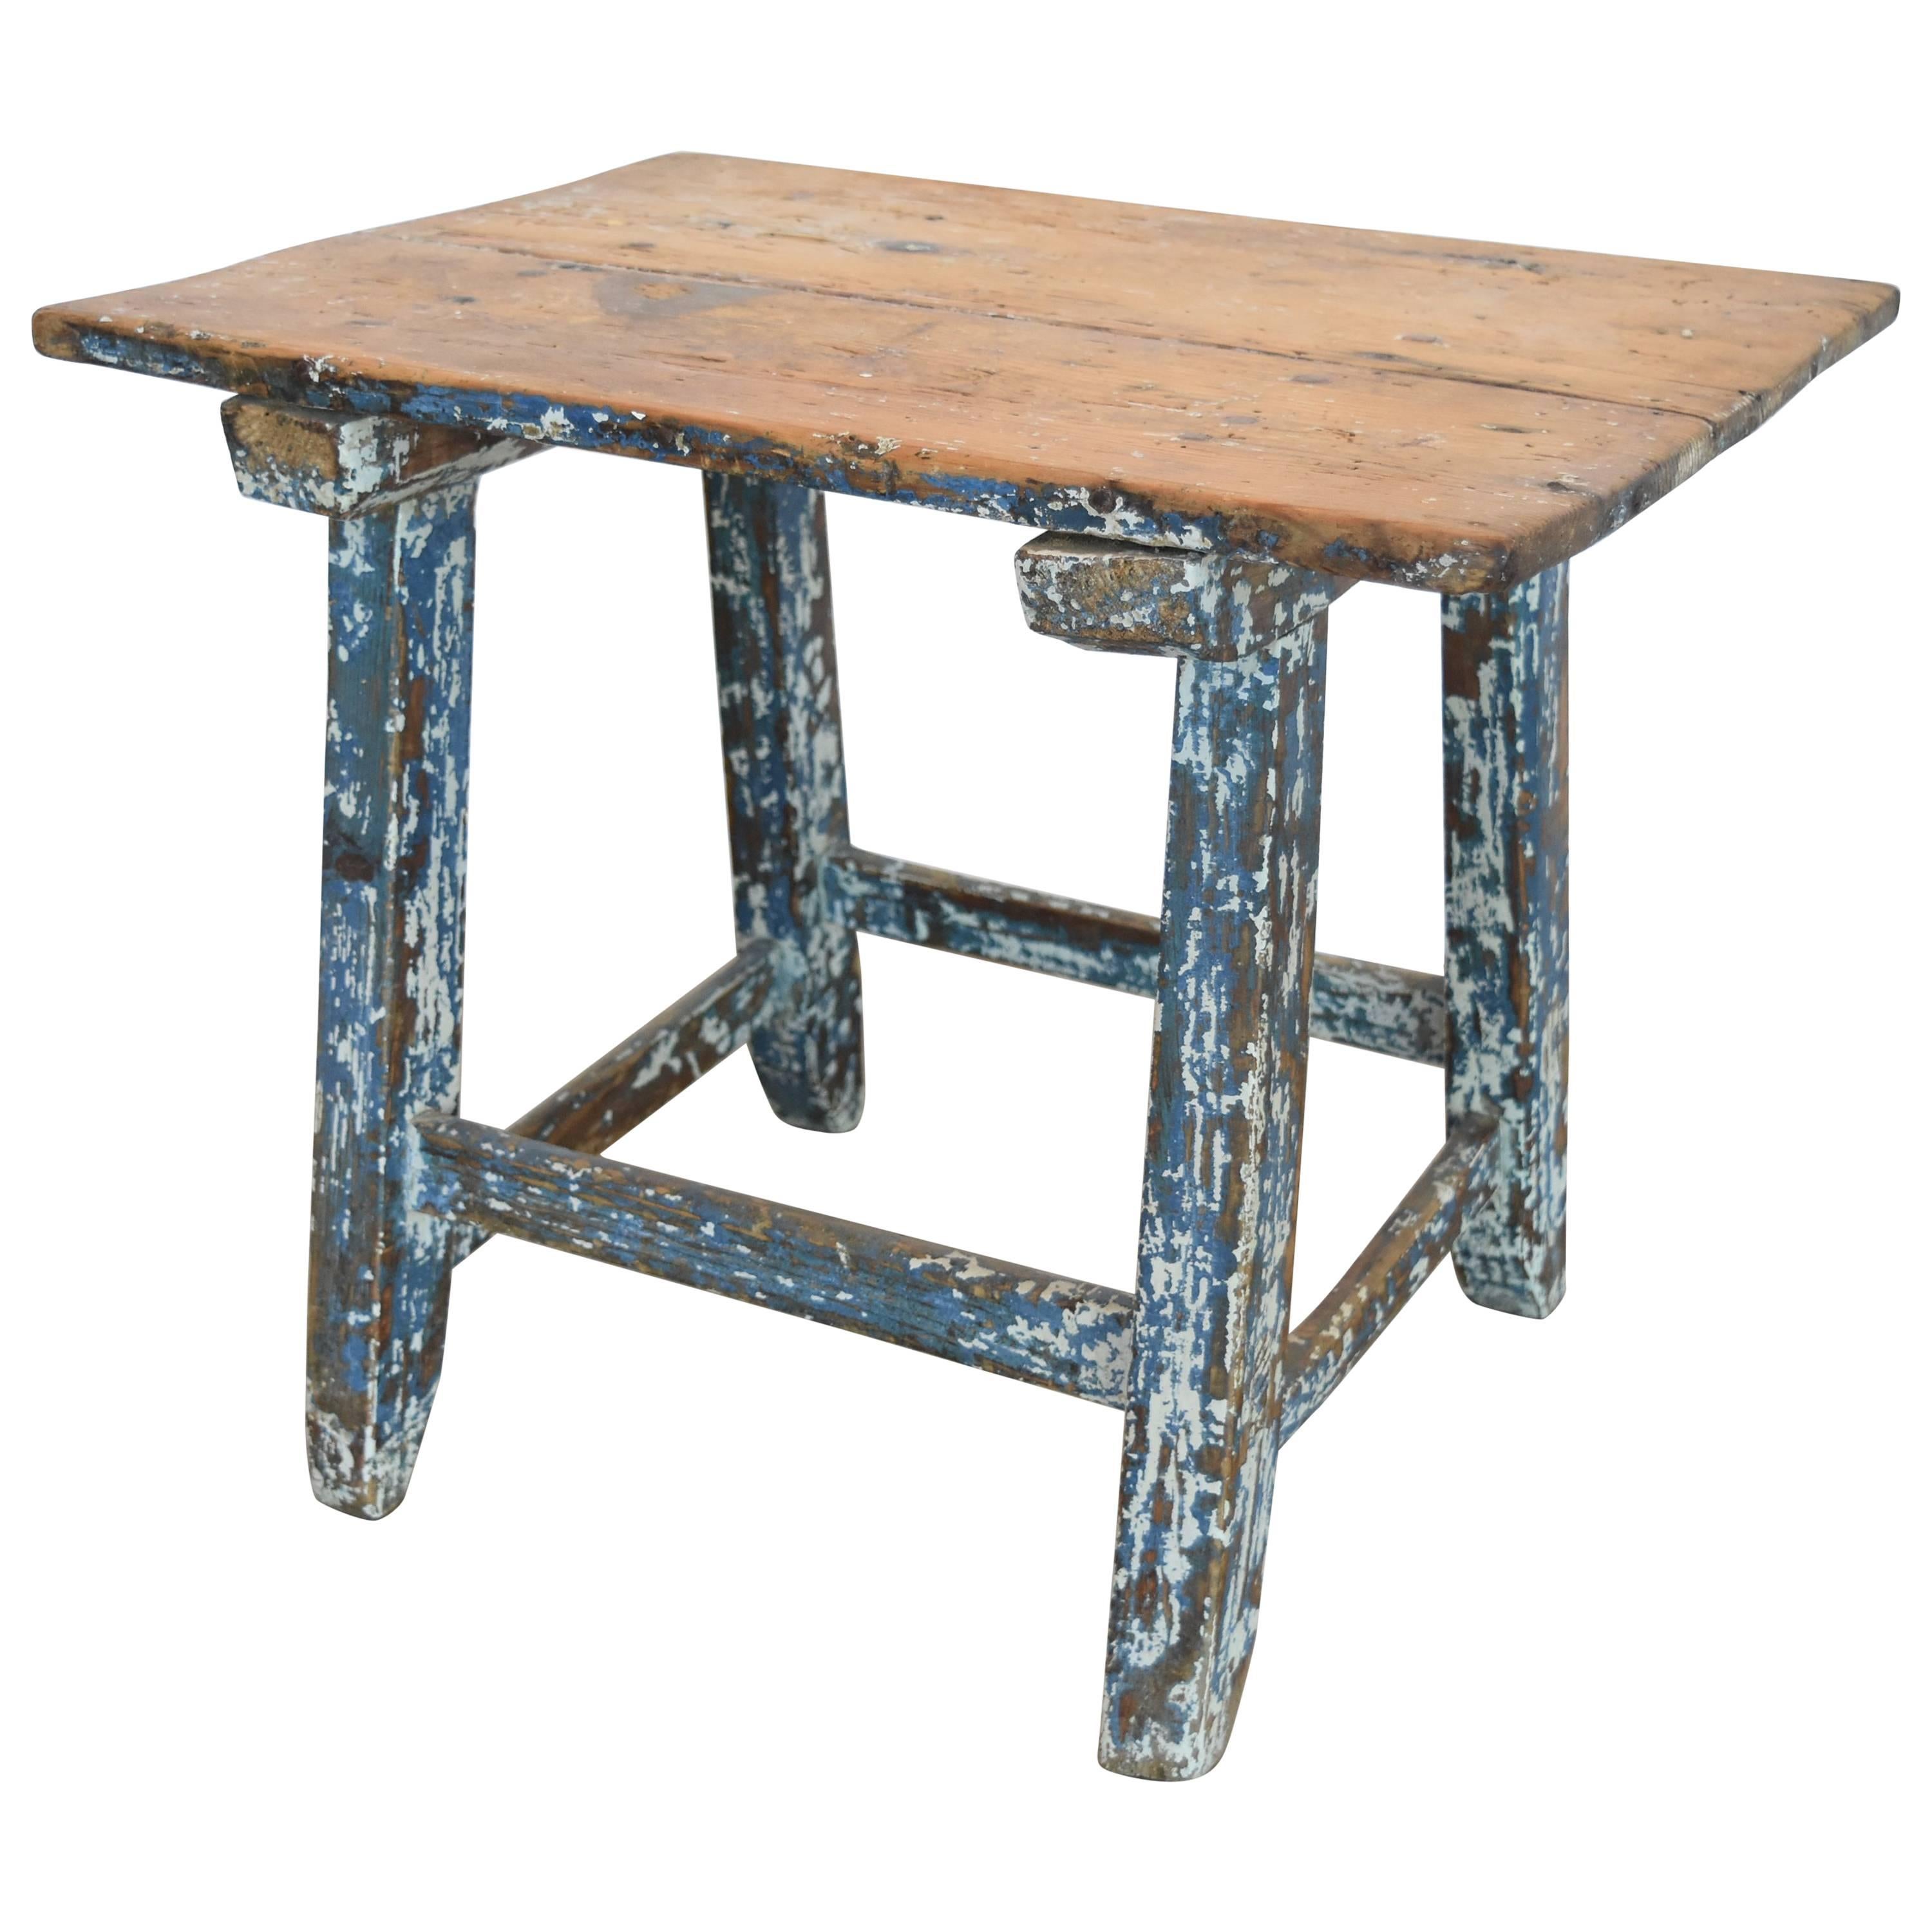 Pine Primitive Spanish Childs Table or Stool with Original Blue White Paint